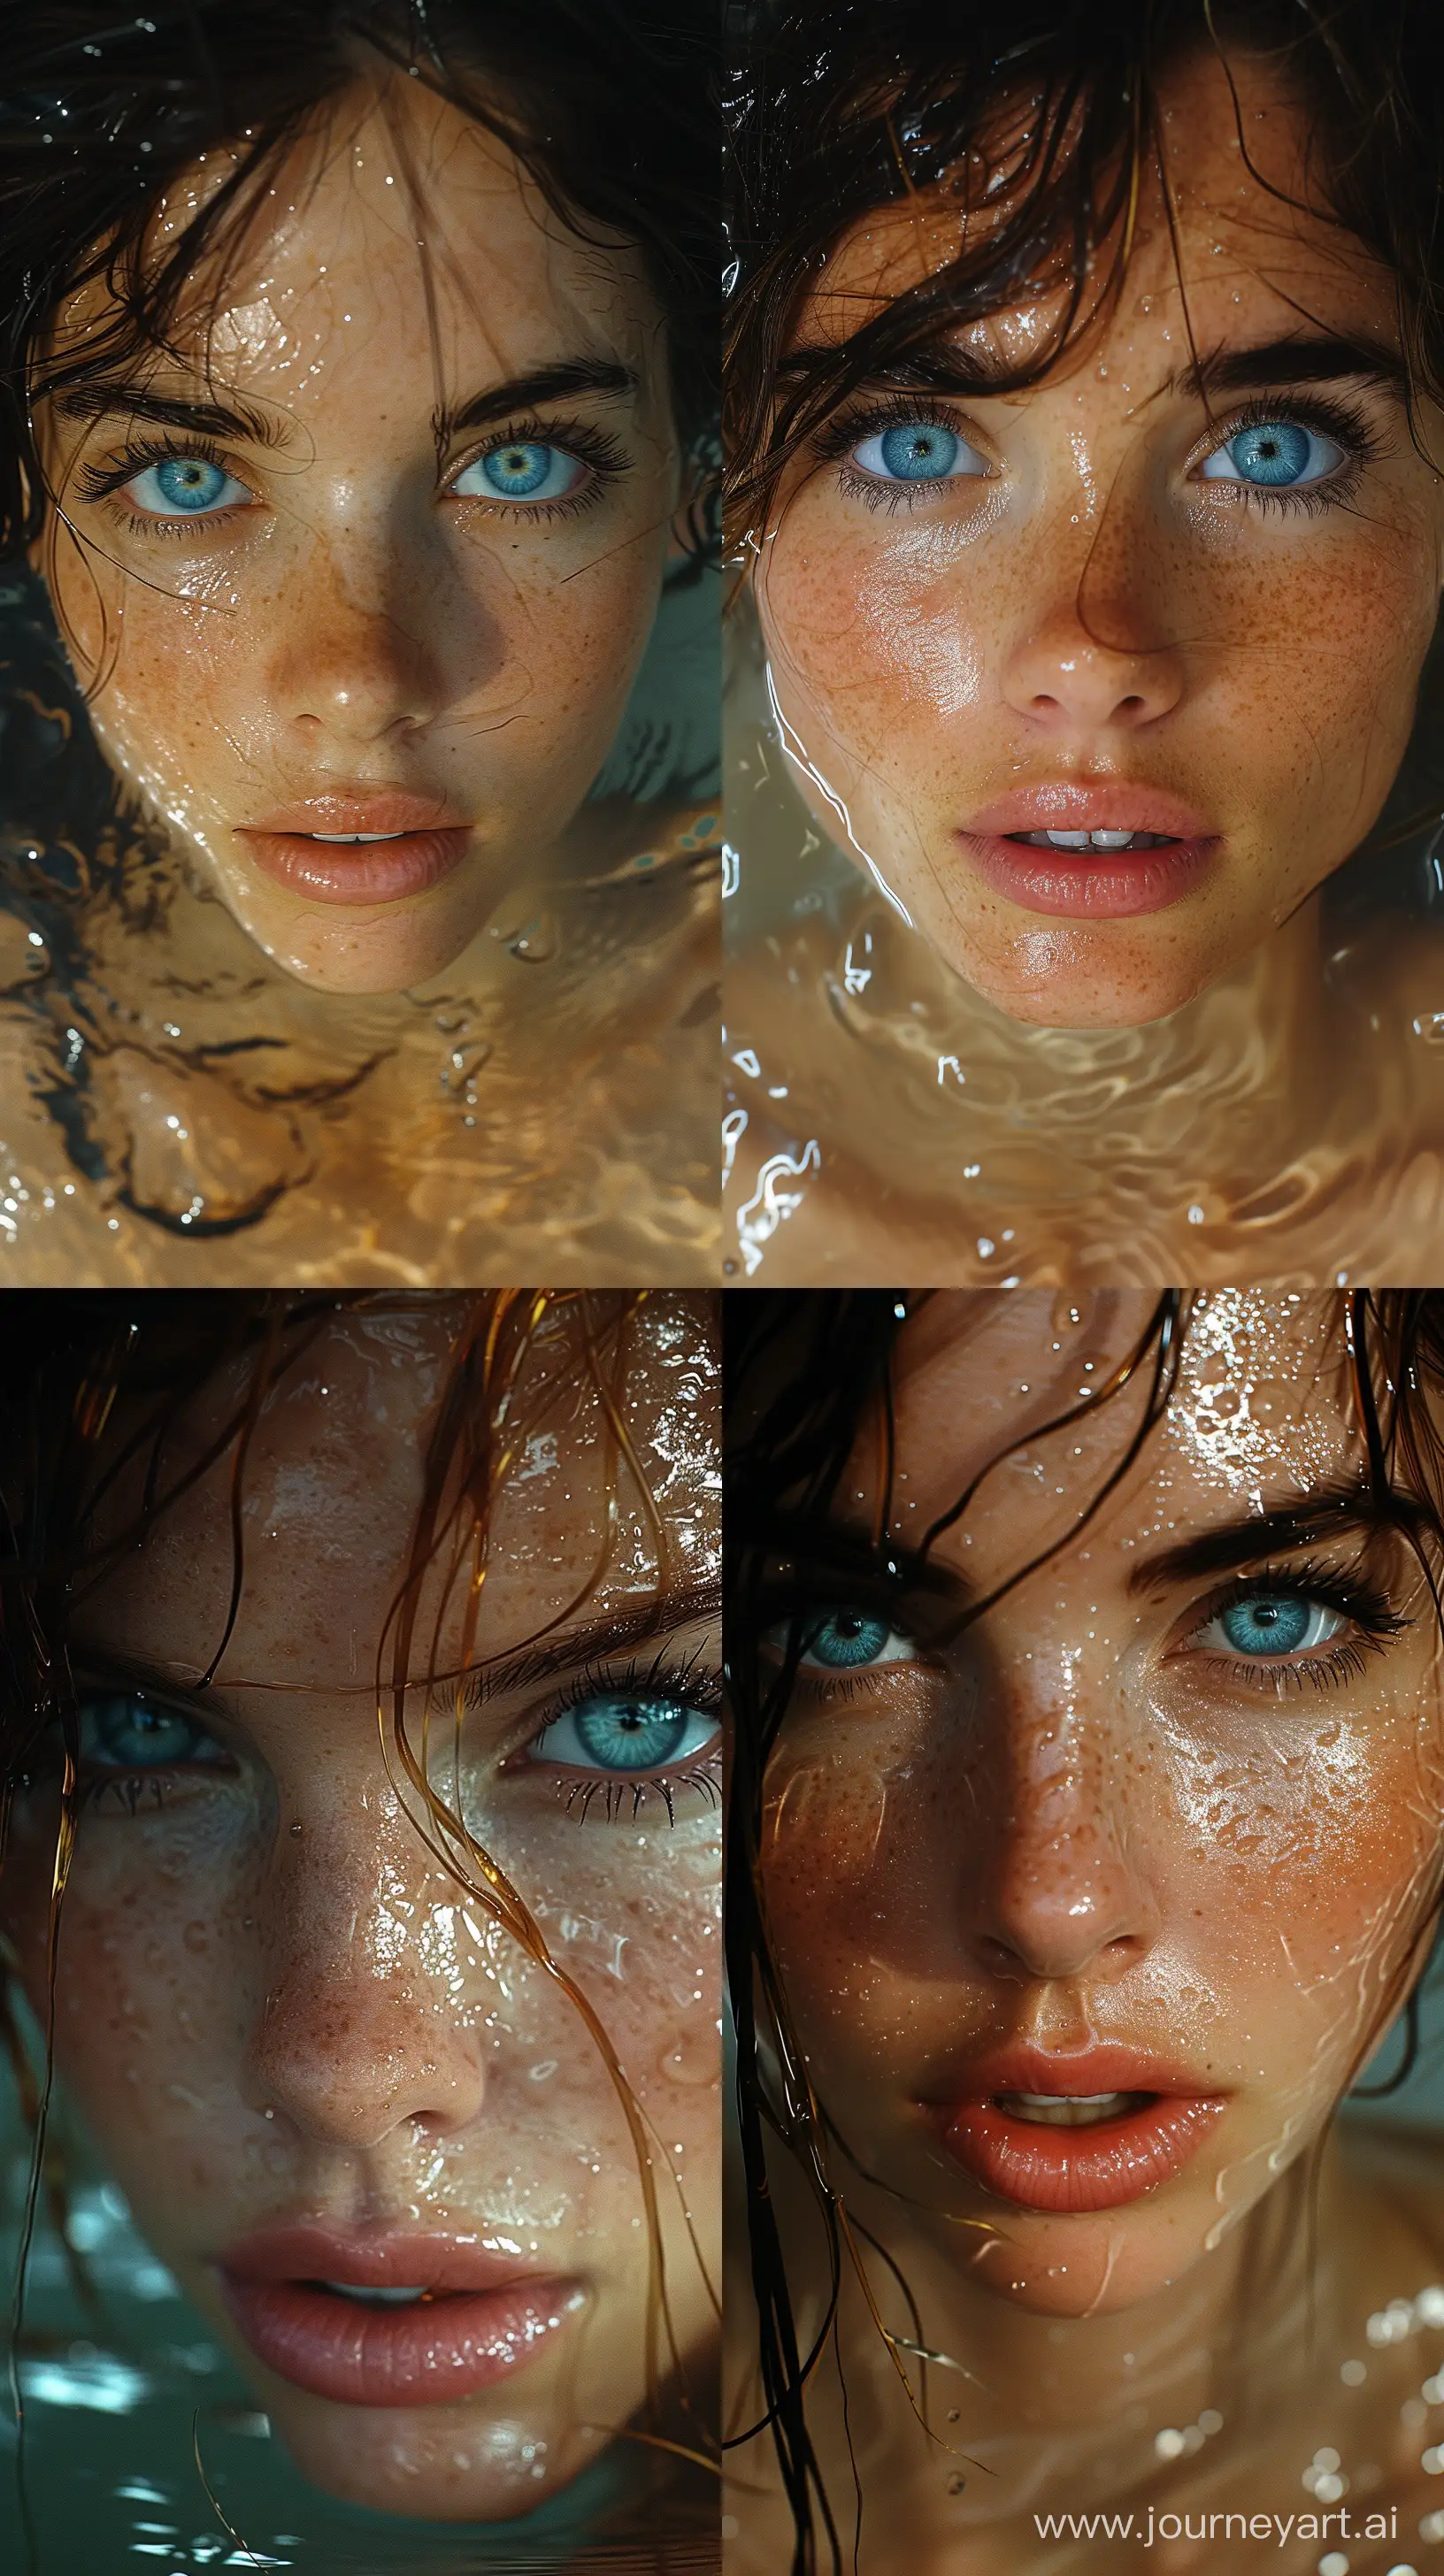 Enigmatic-Woman-with-Beautiful-Blue-Eyes-Submerged-in-Dystopian-Realism